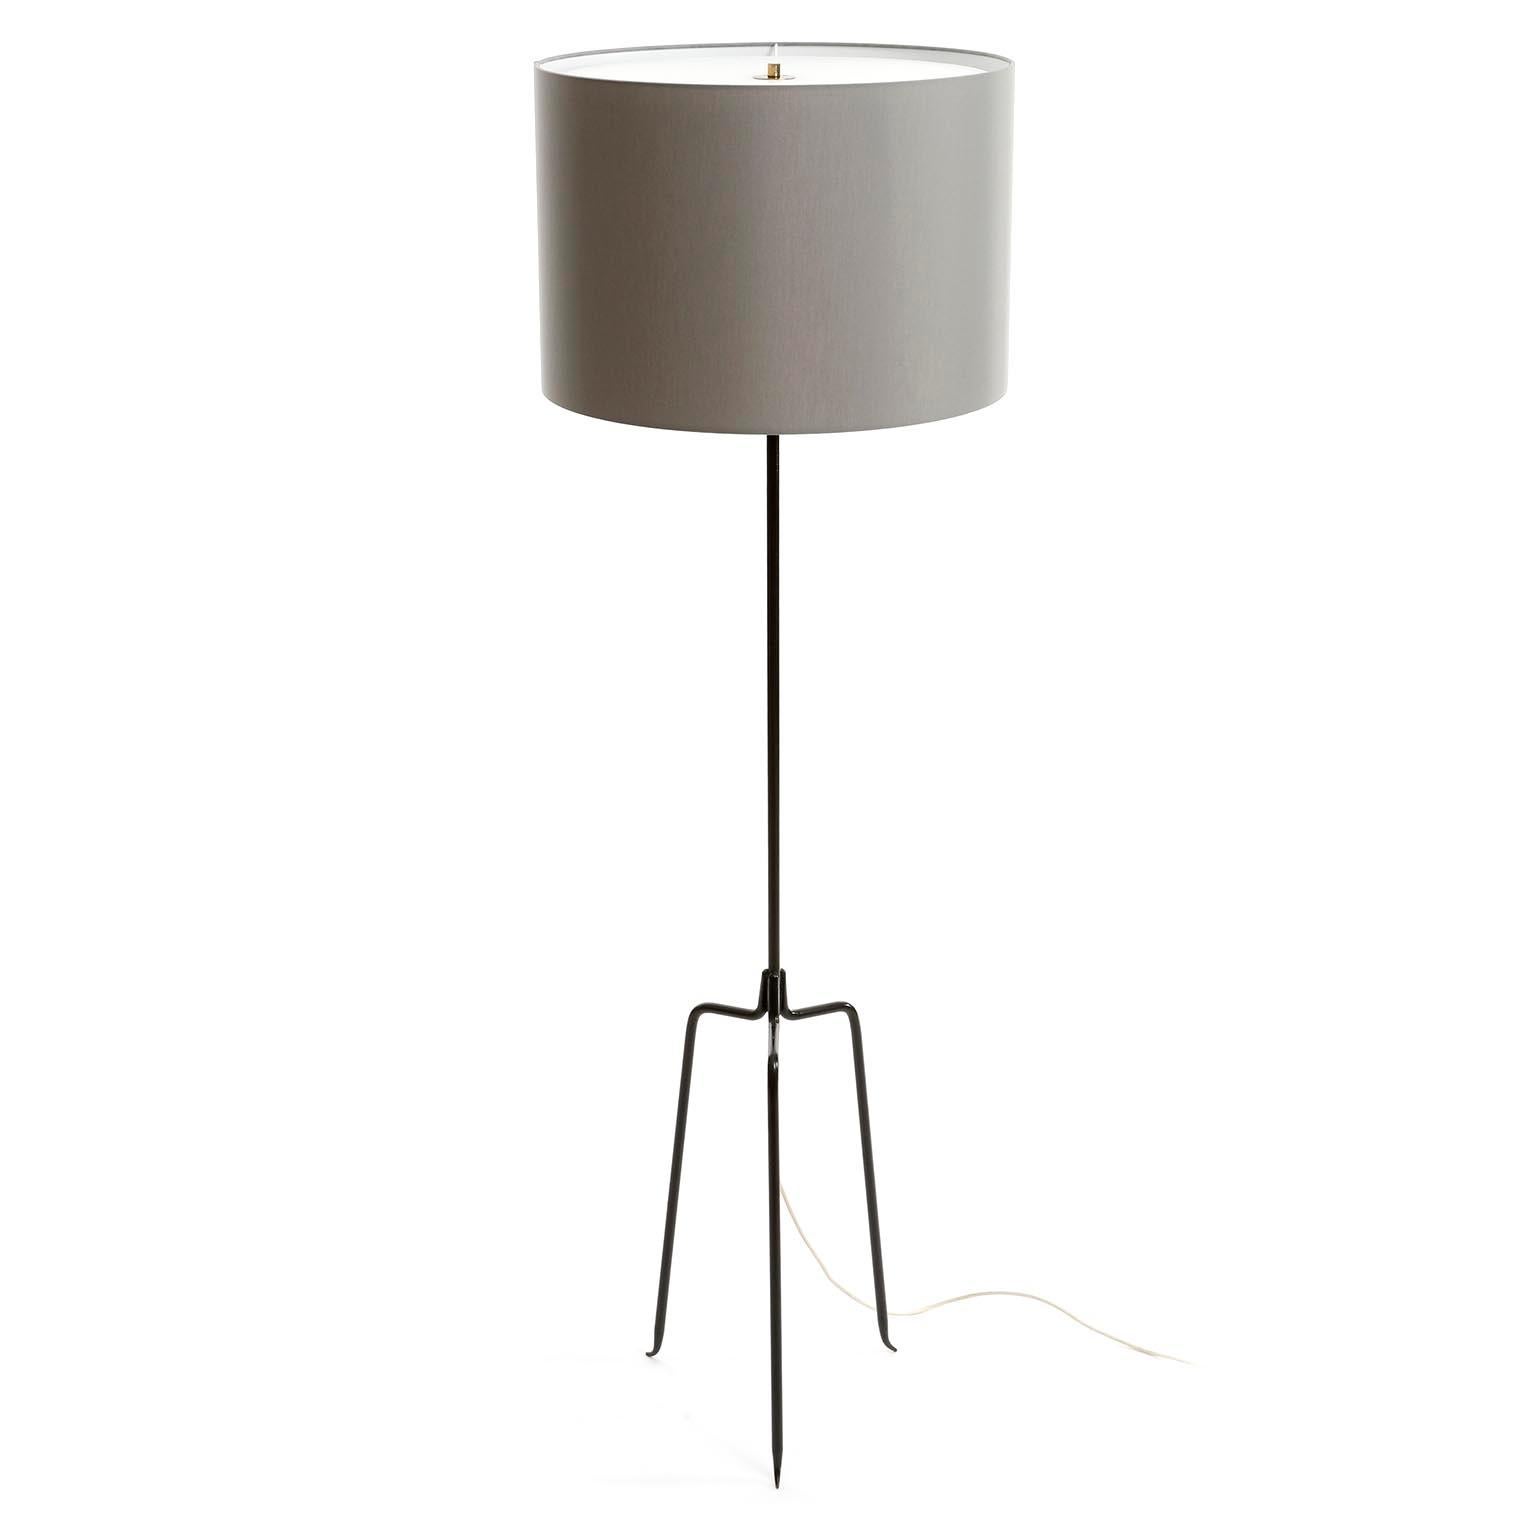 A Mid-Century Modern floor lamp model 'Eisendreistelz' model no. 2061 by J.T. Kalmar, Vienna, Austria, manufactured ca. 1960 (late 1950s or early 1960s).
The light is made of a blackened iron tripod stand, brass and a grey shade.
The shade is